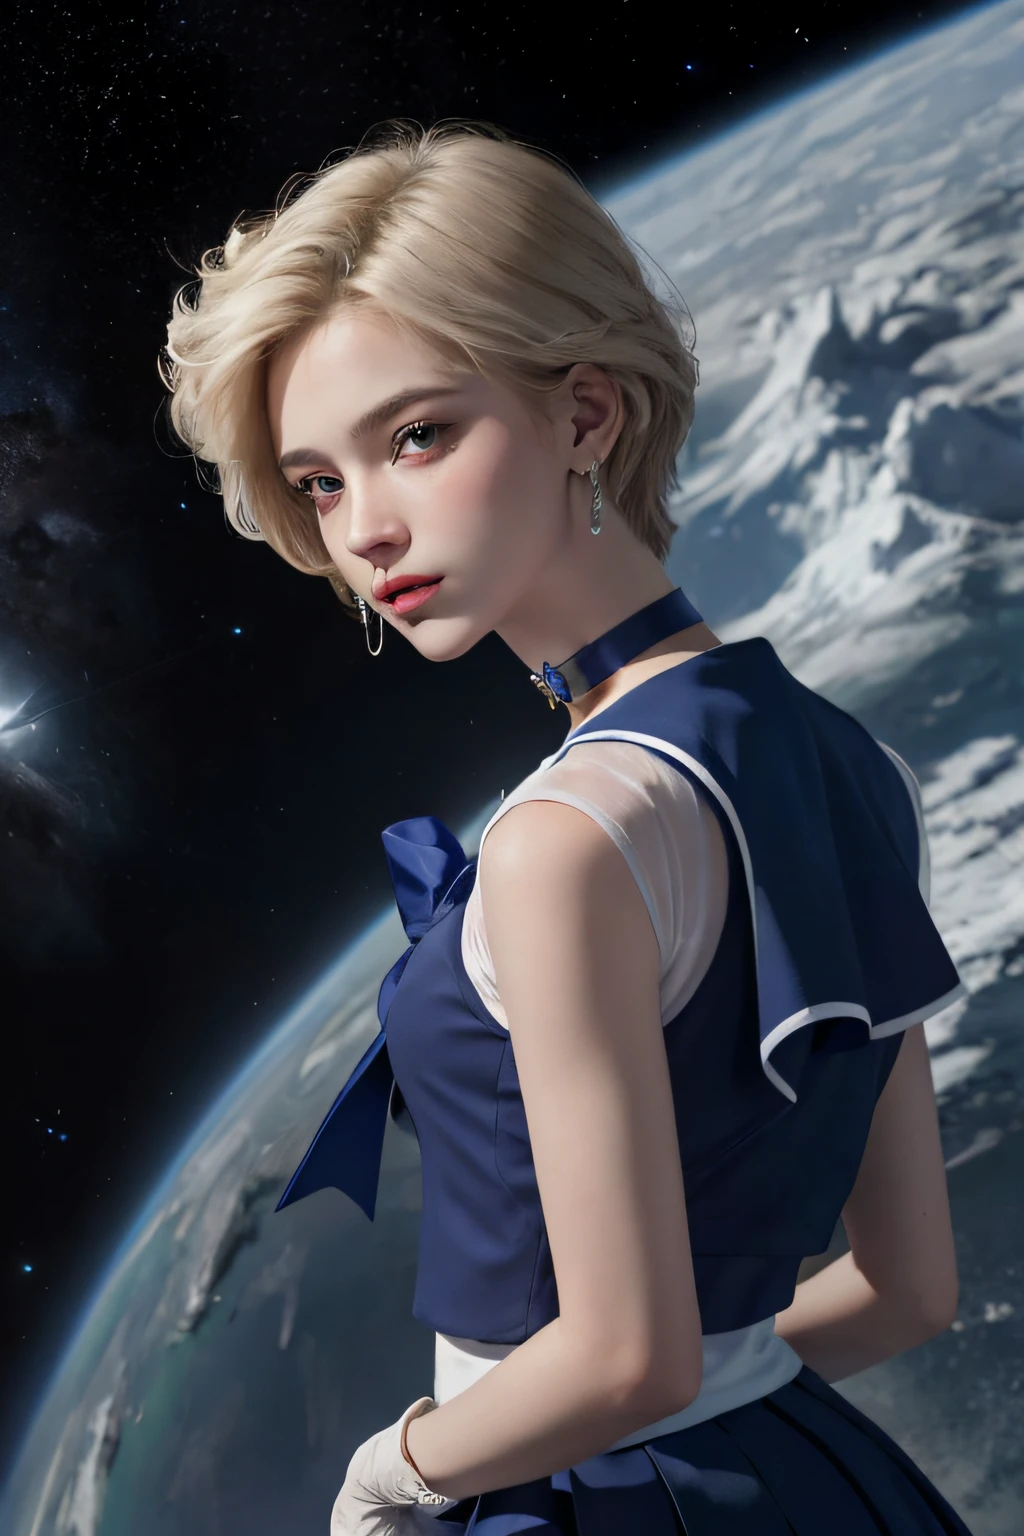 ((HD Real, SAMA1 level)), Extreme Real, Masterpiece, Best Quality, High Definition, SAMA1, Space, Stunning Beauty, Upper Body Shot, 1 Woman, Chest, Gloves, Lips, Solo, Sailor Uranus, Masculine Beauty, Dark Blue Eyes,  Uniform, mer1, Tiara, Sailor Senshi Uniform, (RAW photo, highest quality), Masterpiece, Pale Blonde, Dark blue sailor color, bow, choker, white gloves, dark blue choker, elbow gloves, jewelry, earrings, dark blue skirt, sole, full body, pale blonde berry short hair, (perfect hands): 3.8, octane rendering, goddess of Uranus, (close-up: 1.2) finely detailed beautiful eyes, close-up, small eyes, look at the viewer, to8contrast style, octane line art, space background, Uranus, slashing effect, dark blue, cold gaze, no makeup, expressionless, lowered hand